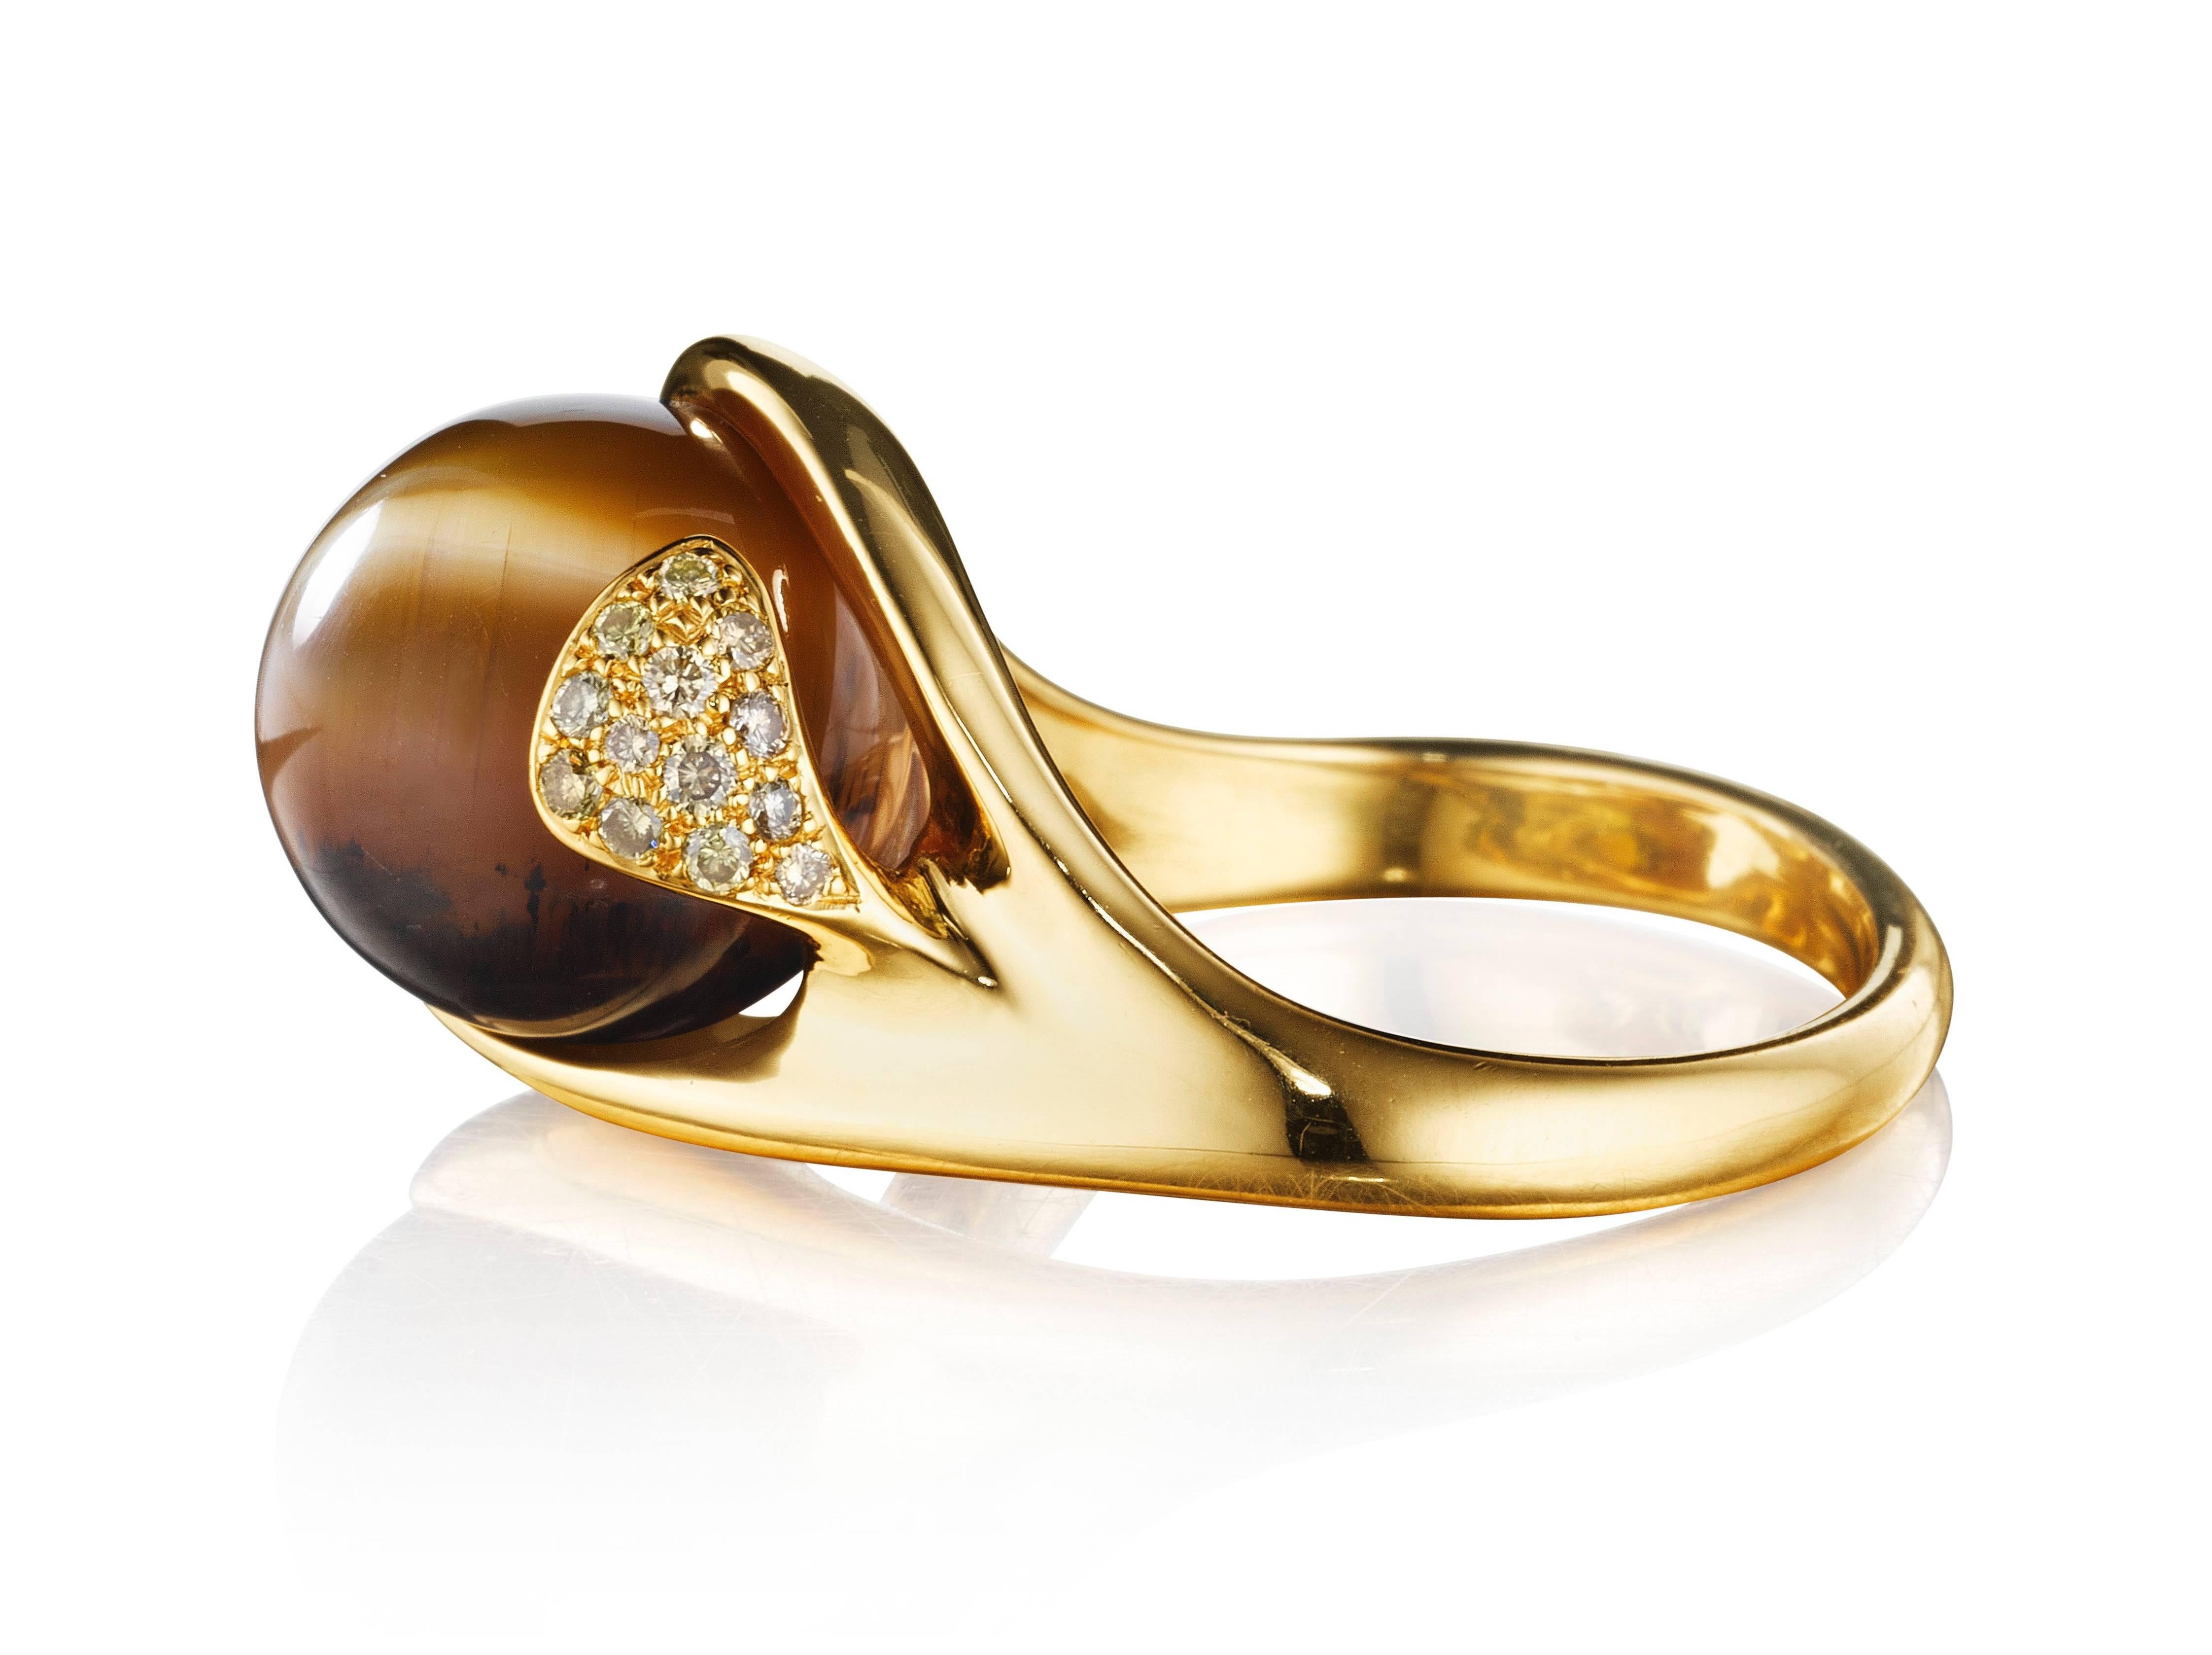 This hand-crafted ring features a brown cat's eye opal set in 18K yellow gold and complimented by VS-FG white diamonds . Like all rings from Naomi Sarna, this is an extremely comfortable ring to wear. 

Internationally award winning designer Naomi